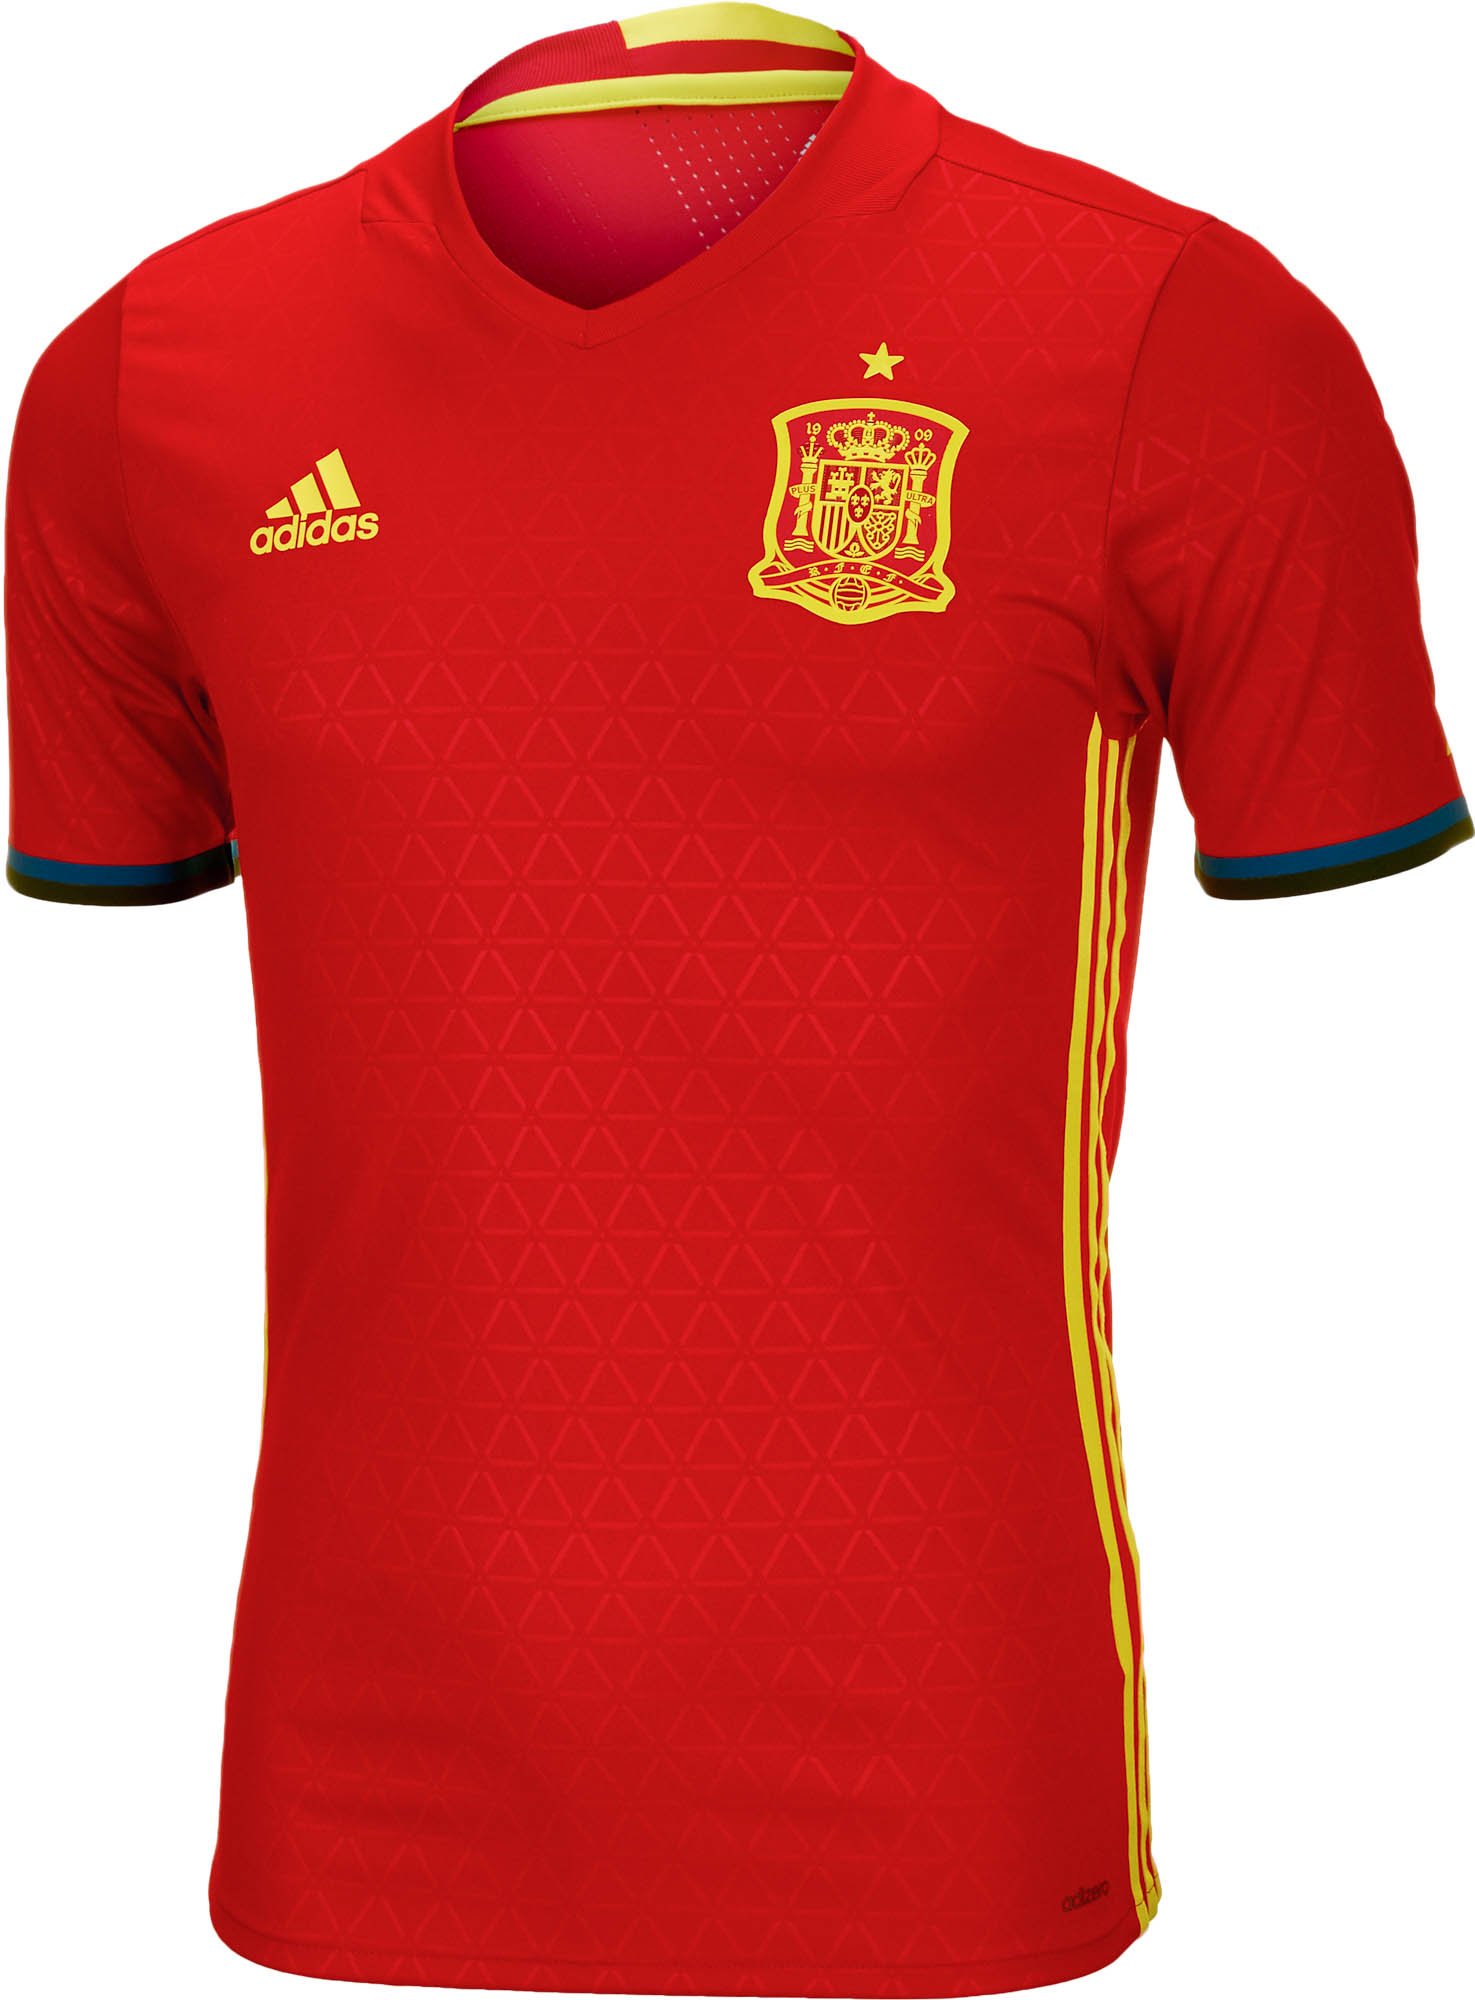 adidas Authentic Spain Jersey - 2016 